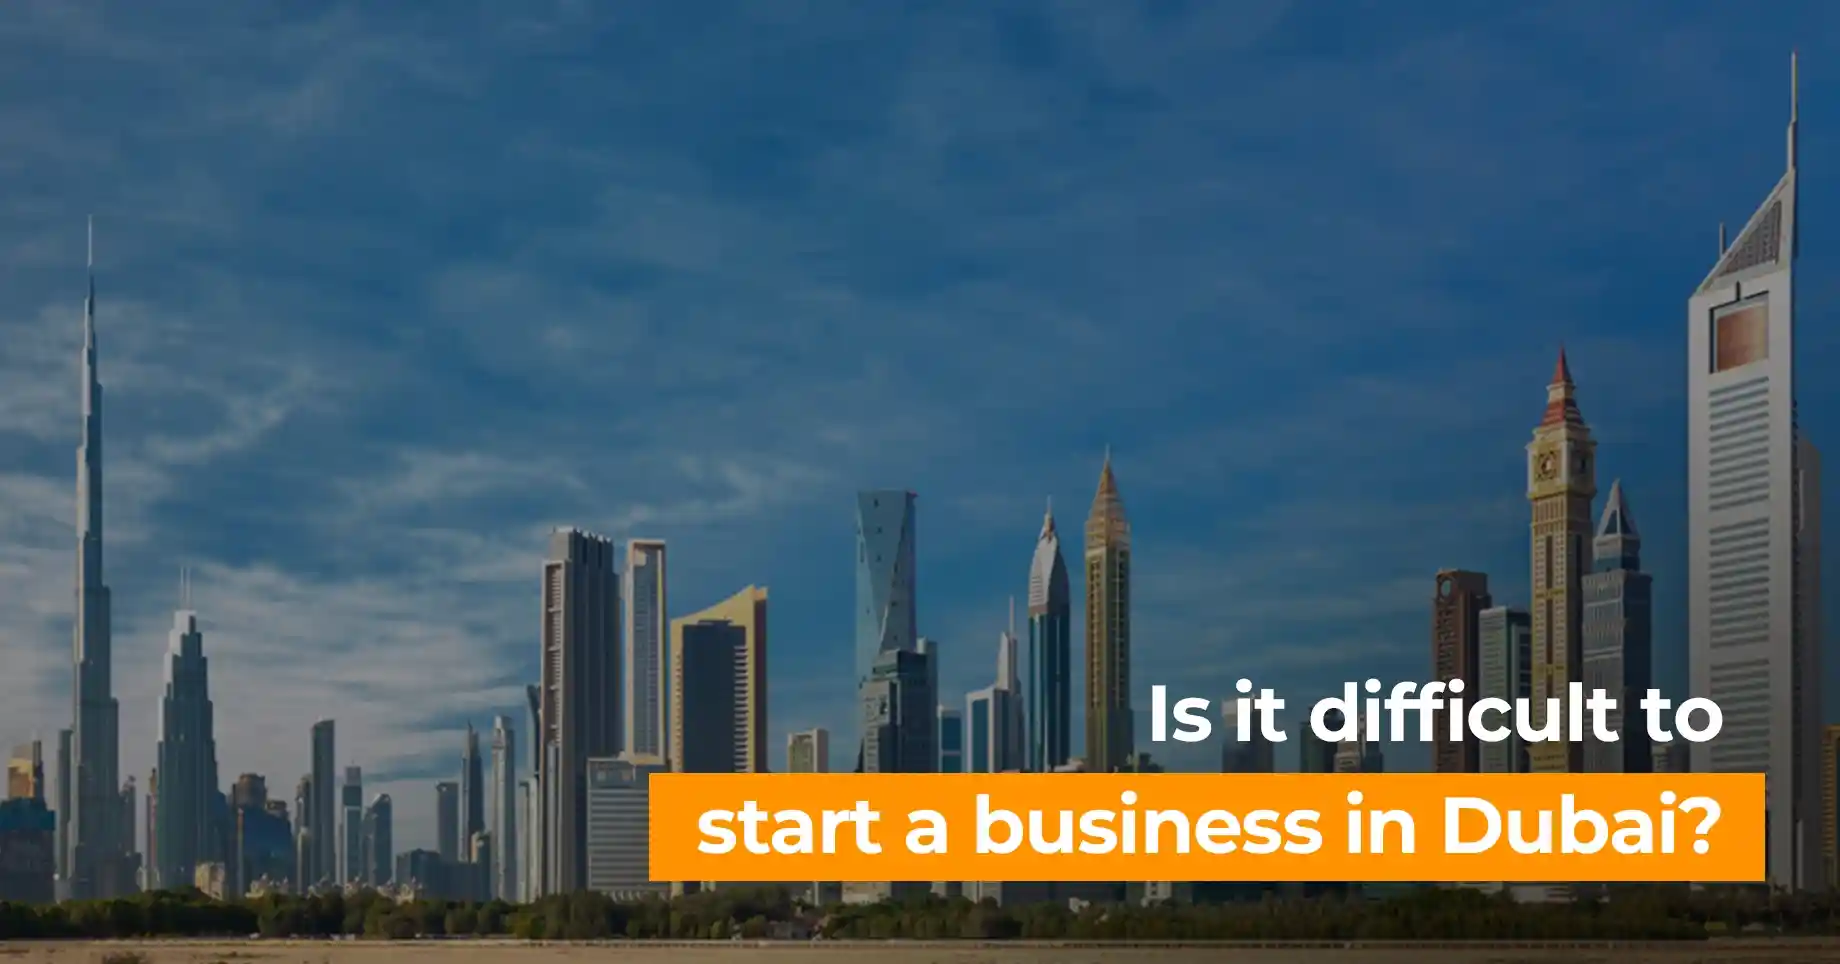 Is it difficult to start a business in Dubai?